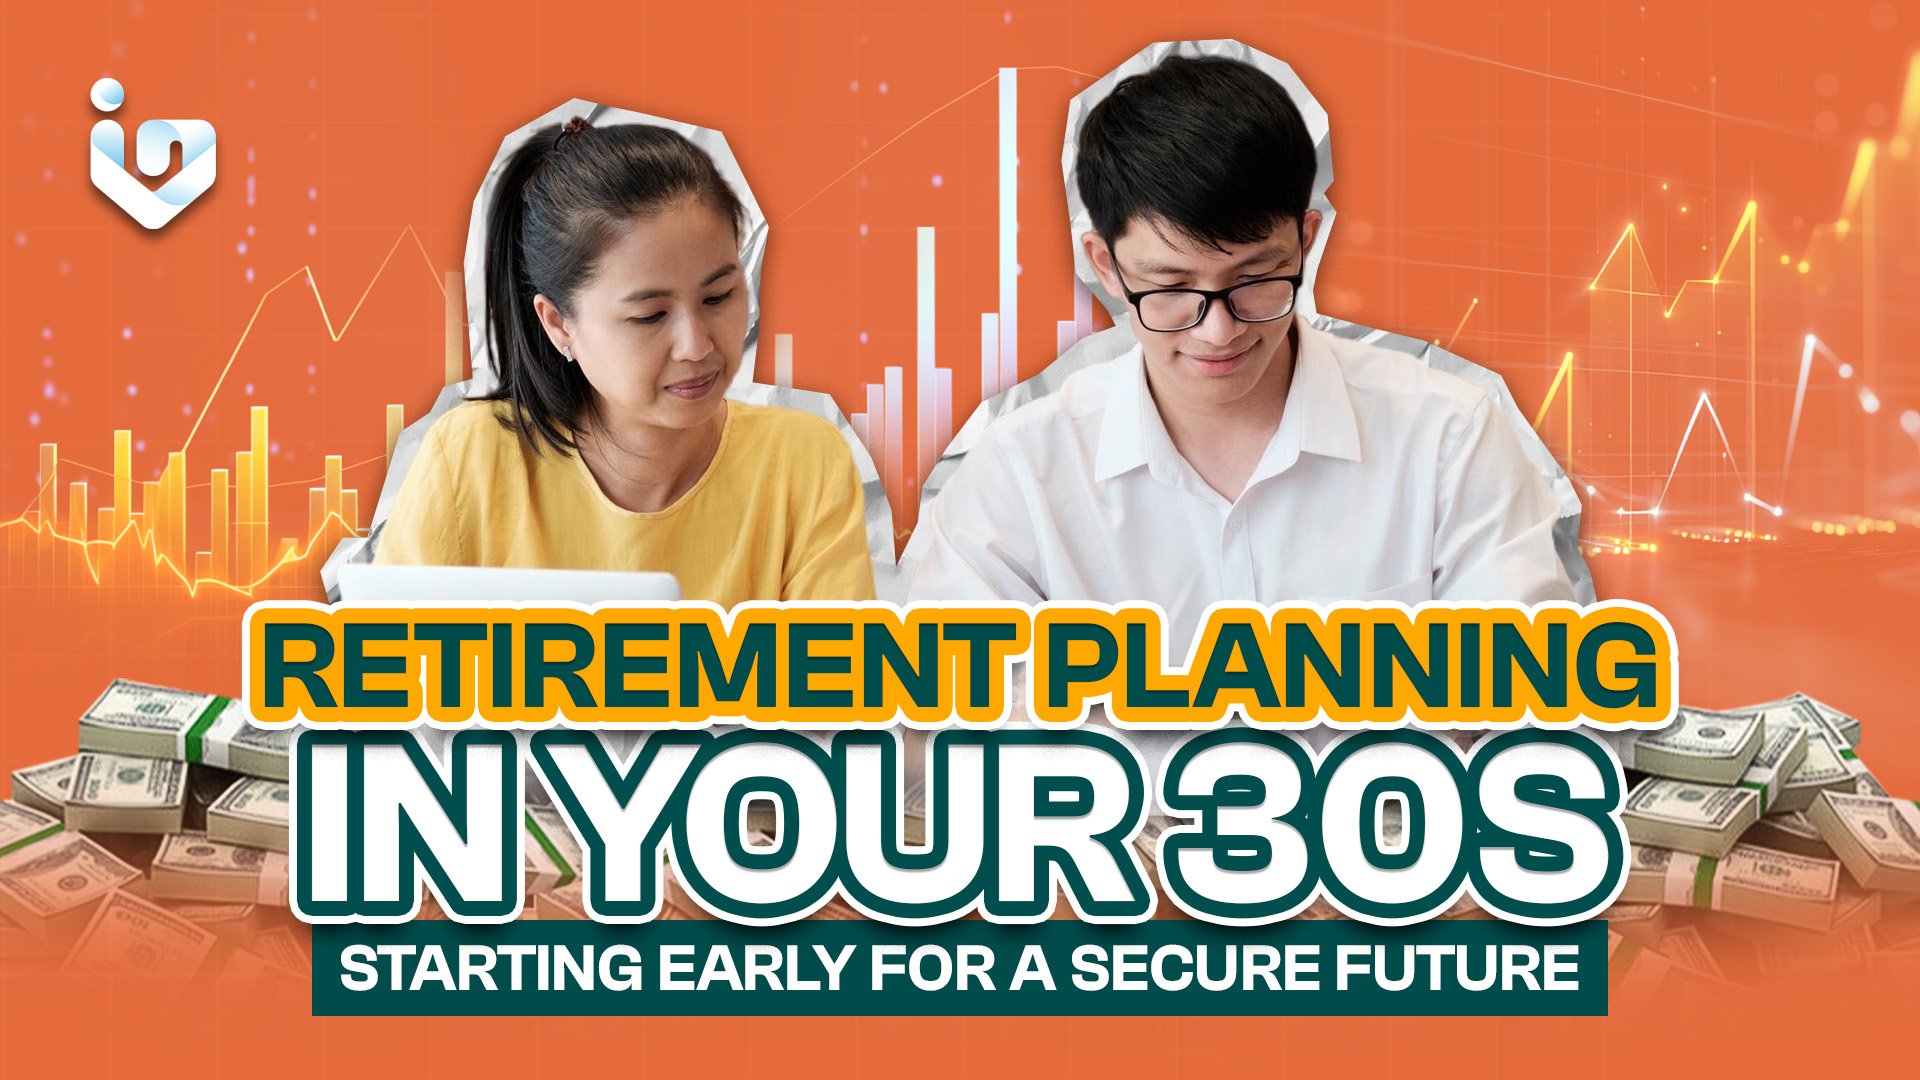 Retirement Planning in Your 30s: Starting Early for a Secure Future Retirement Planning in Your 30s: Starting Early for a Secure Future 100% 11 Copied selection to clipboard